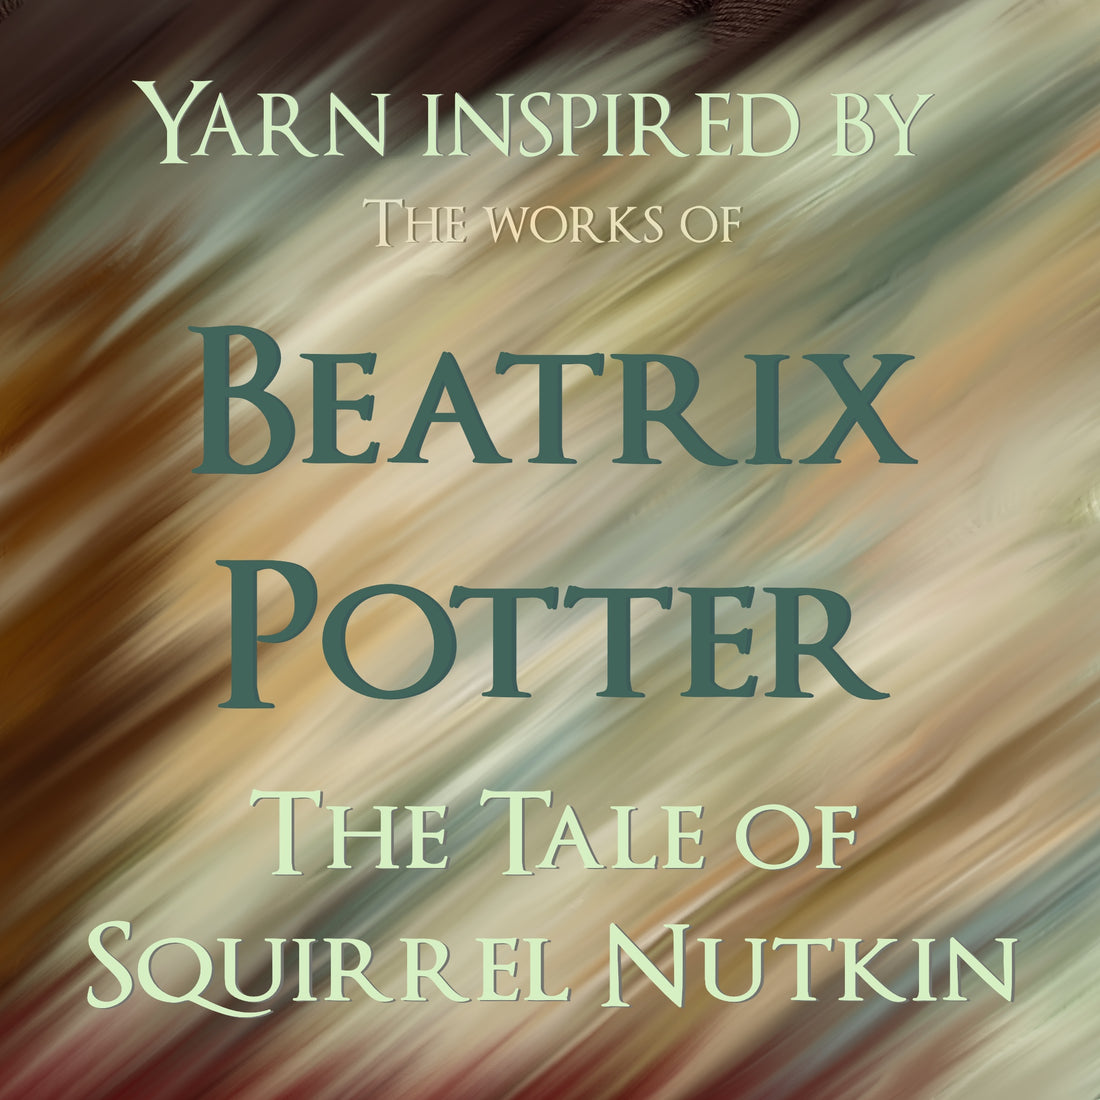 Nutkin’s Riddle |  The Tale of Squirrel Nutkin  |  Beatrix Potter Inspired SOCK SET  |  Choose Fingering or DK weight